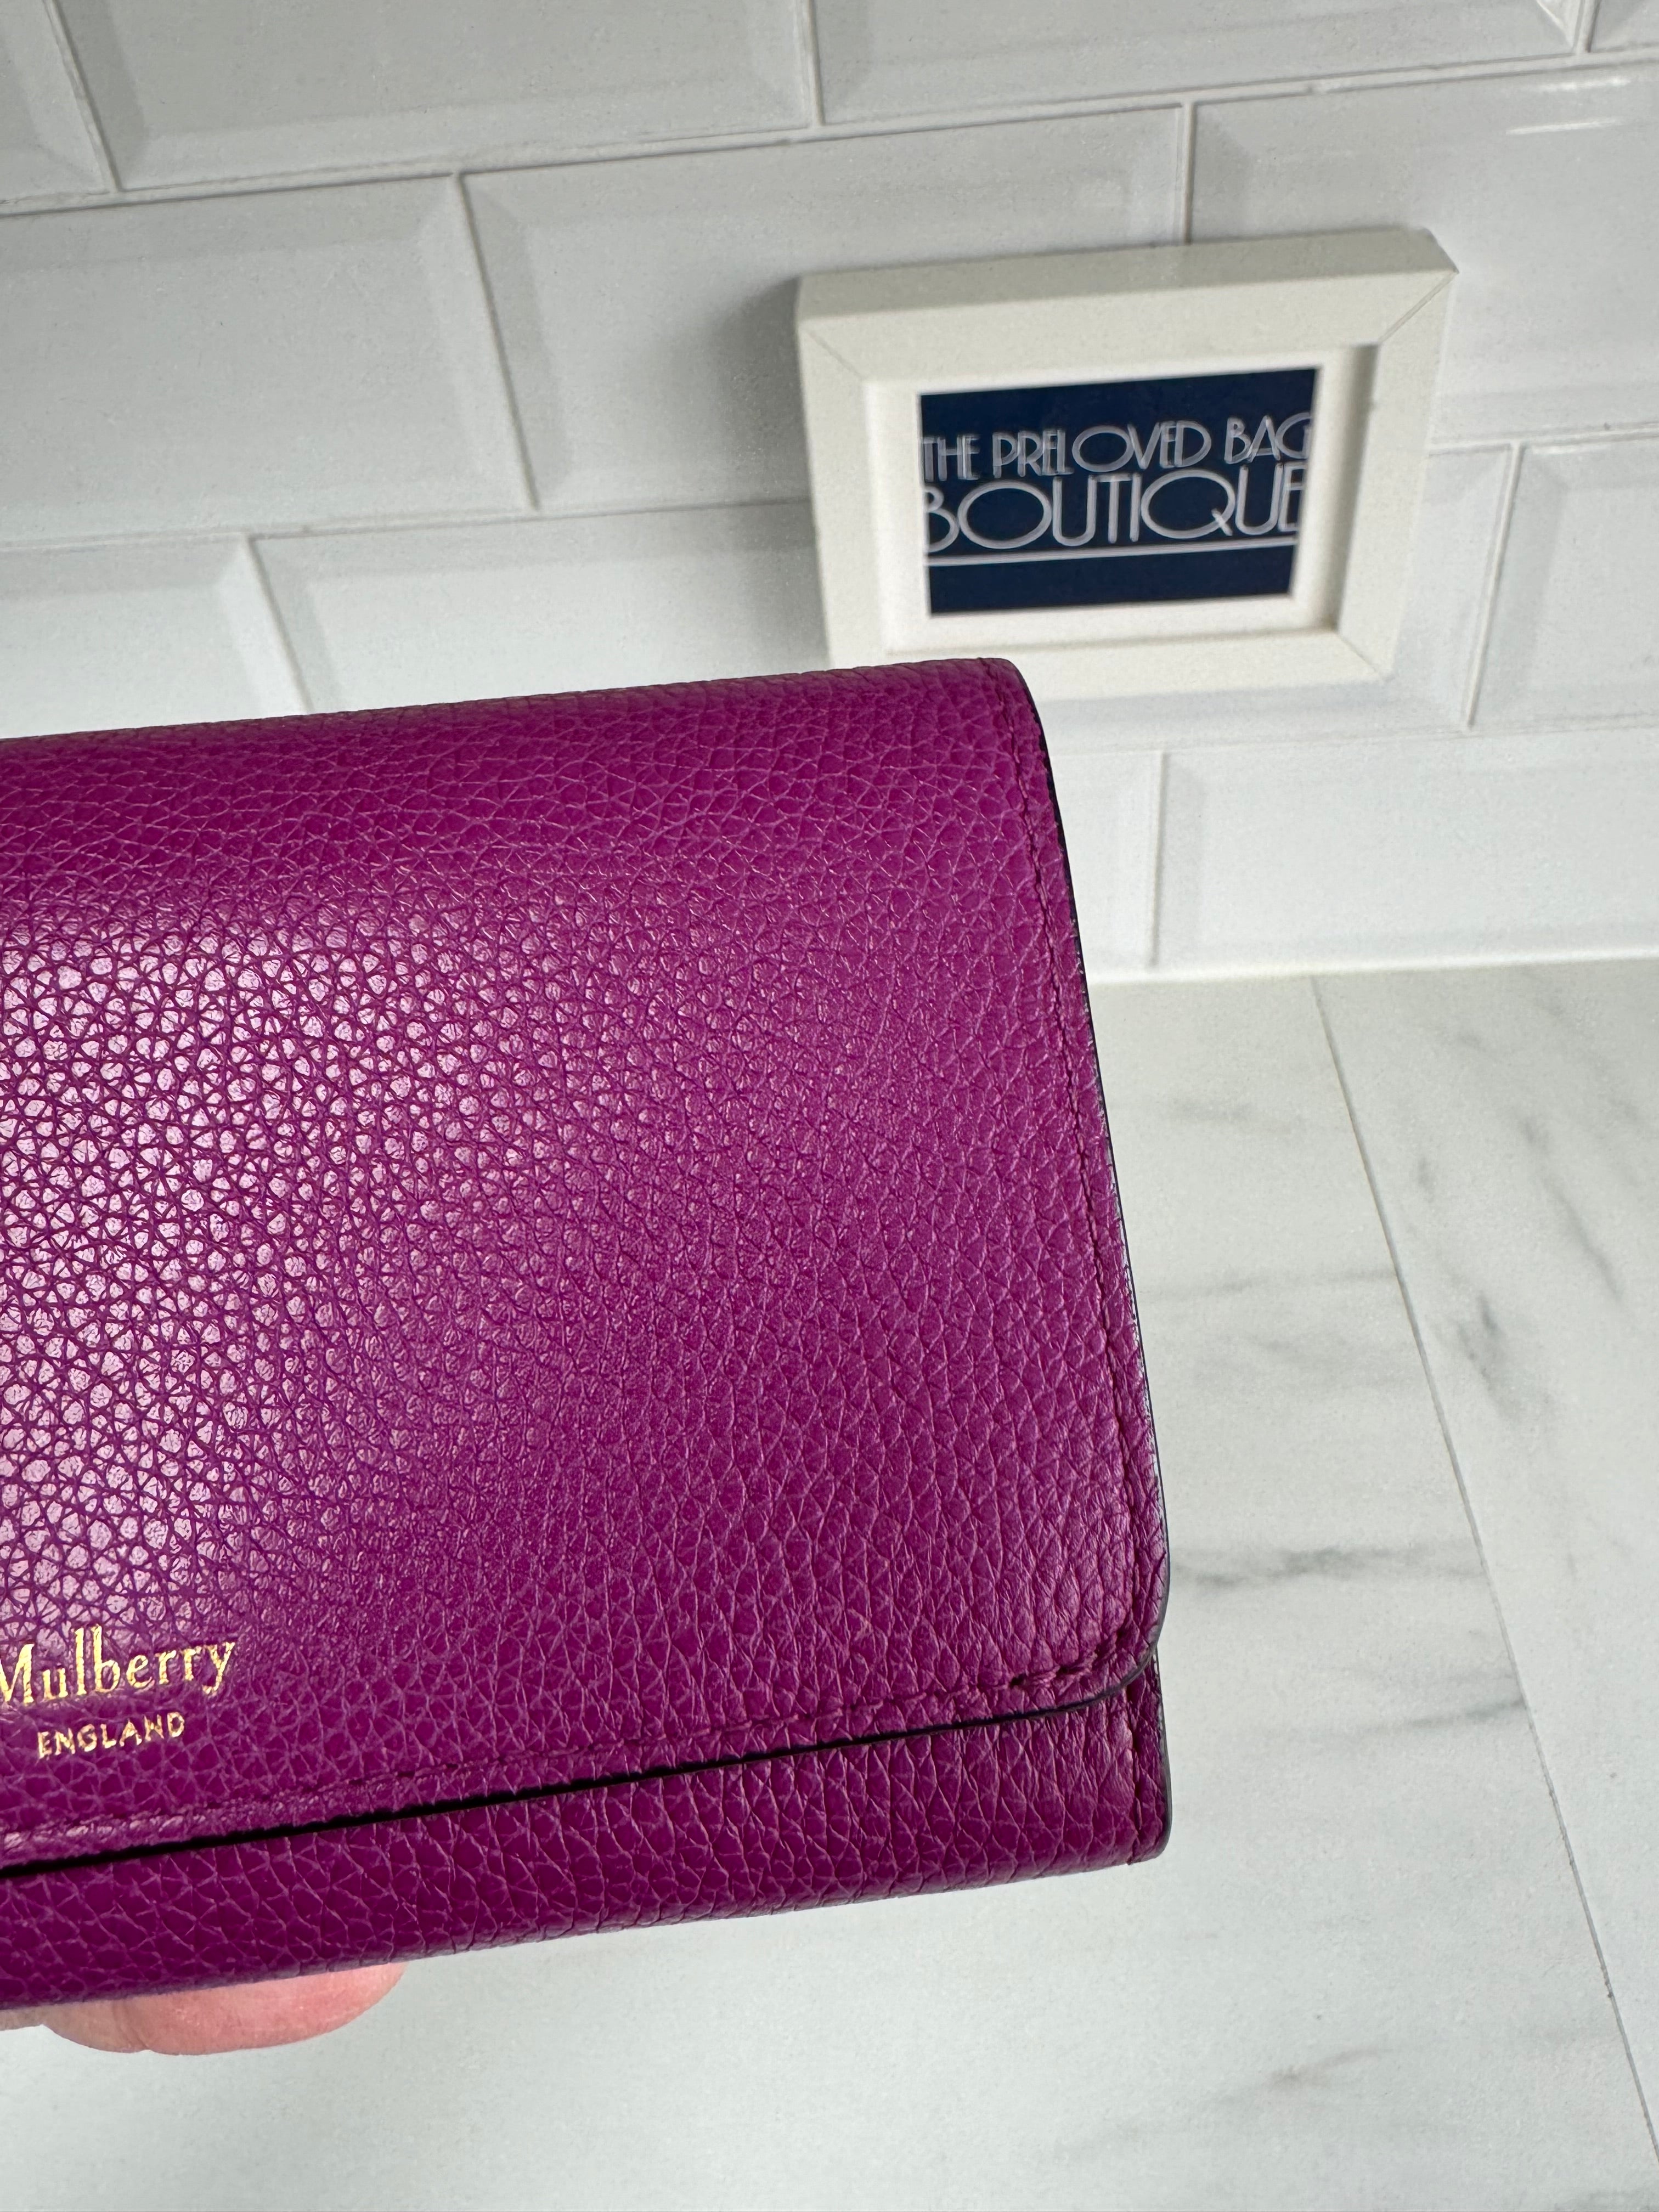 Mulberry Handbags, Purses & Wallets for Women | Nordstrom